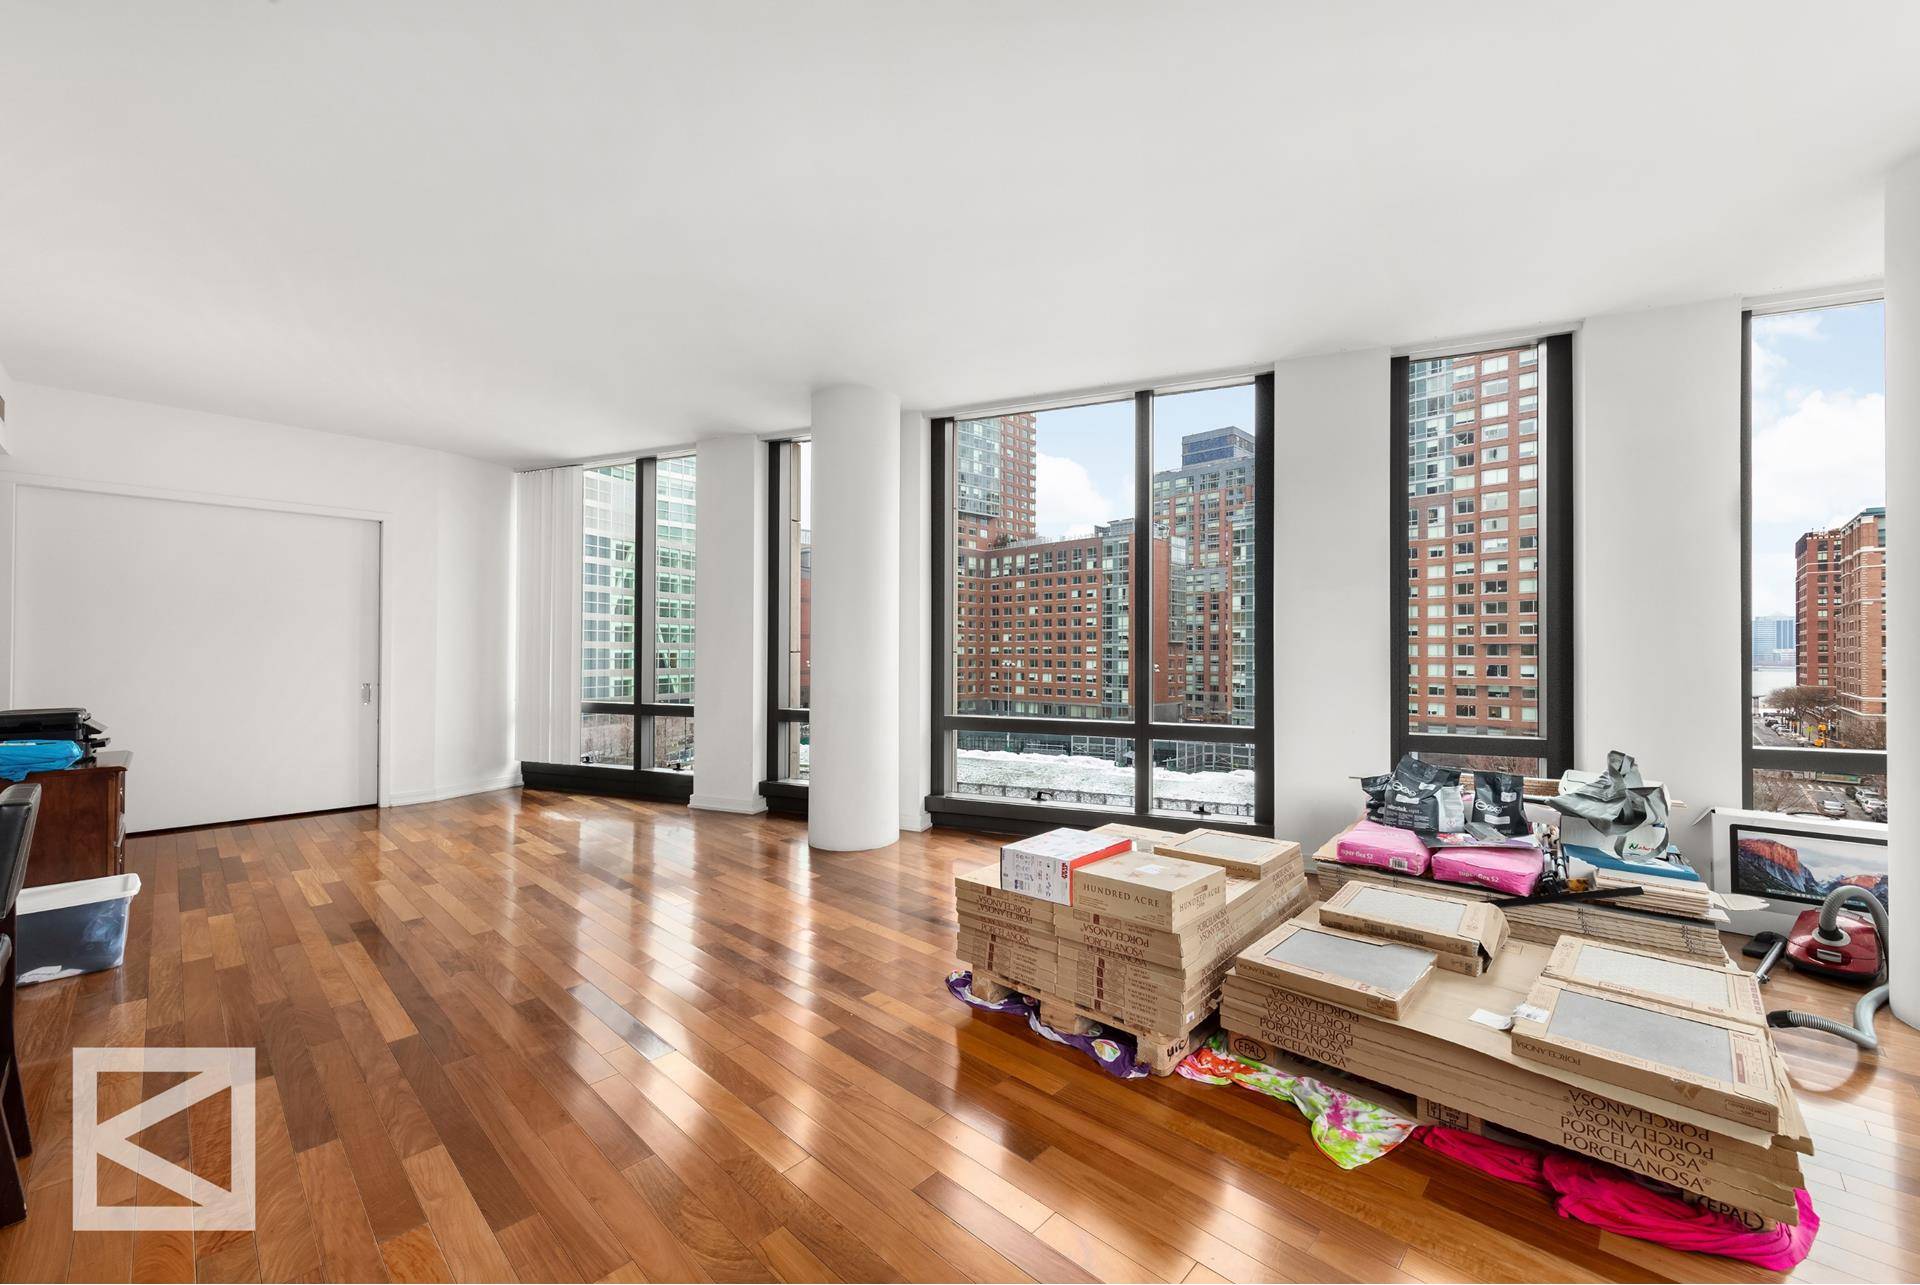 Offering over 3, 800 square feet of living space and spanning two corners of the building in Tribeca's most sought after neighborhood, these two individual residences come together to provide ...